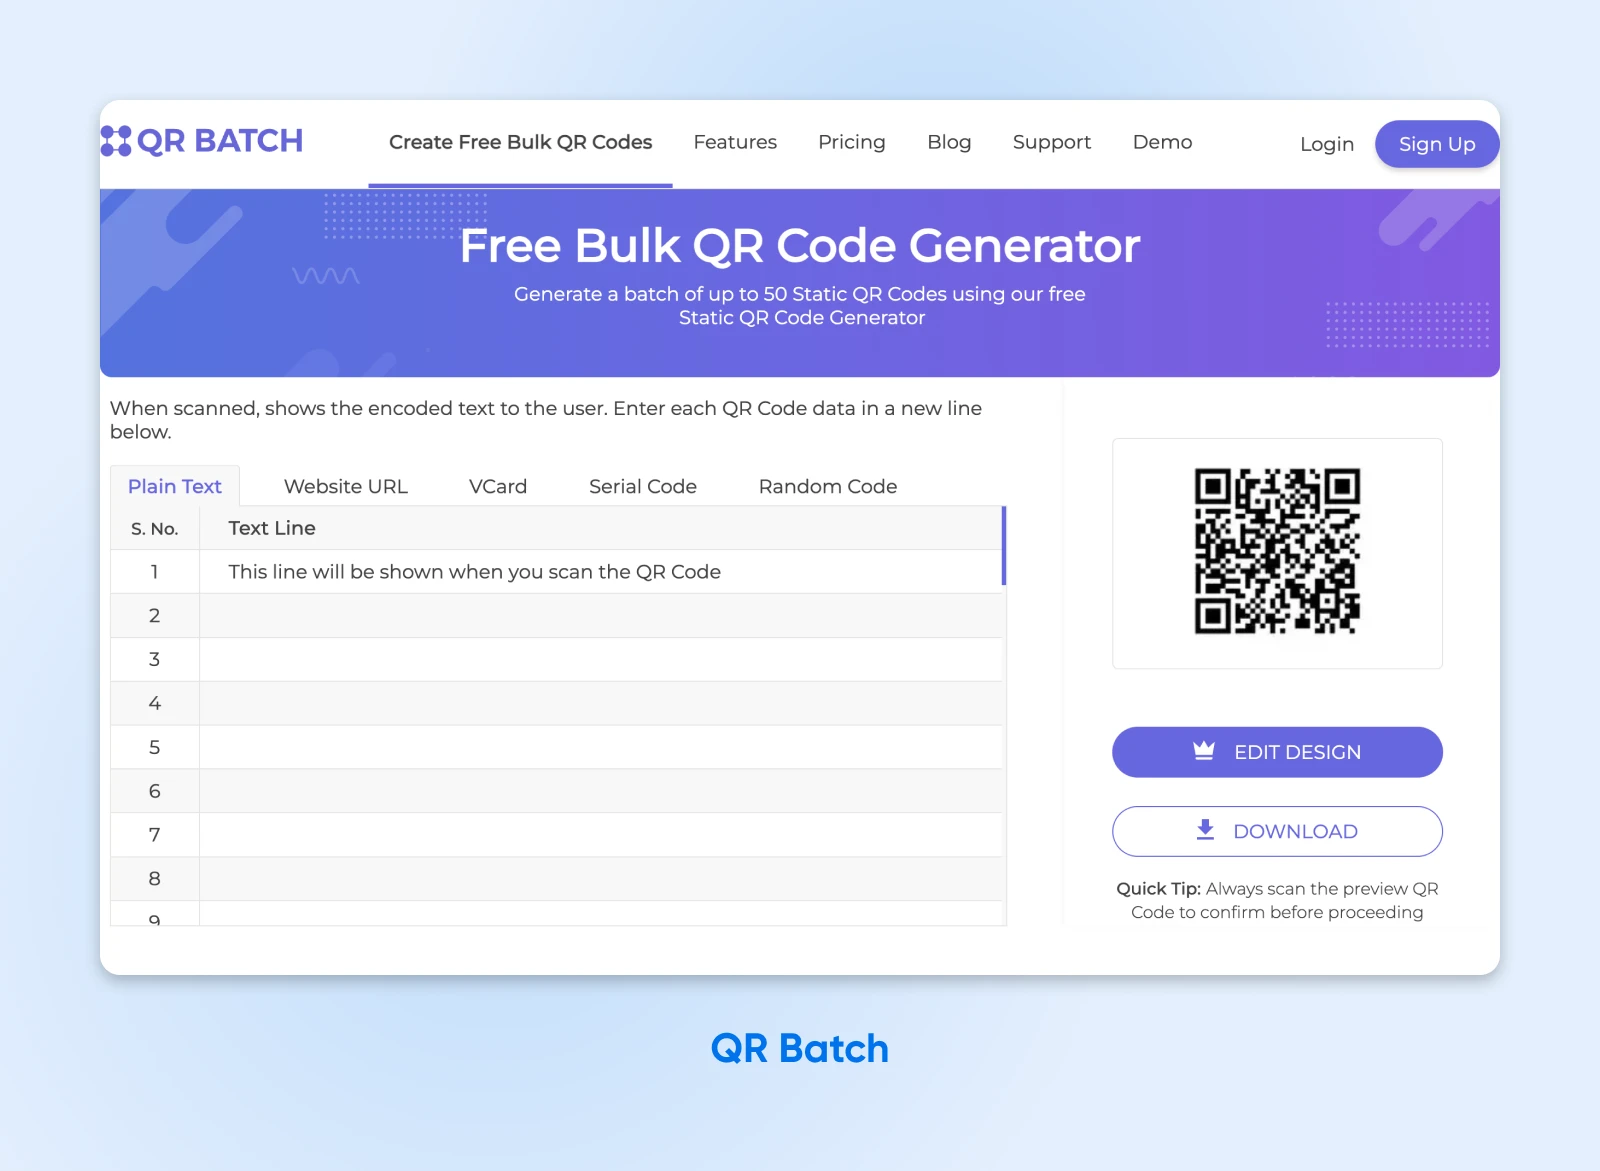 QR Batch lets you generate QR codes in bulk. The right shows you the current QR code design. Click on a button to edit it. 